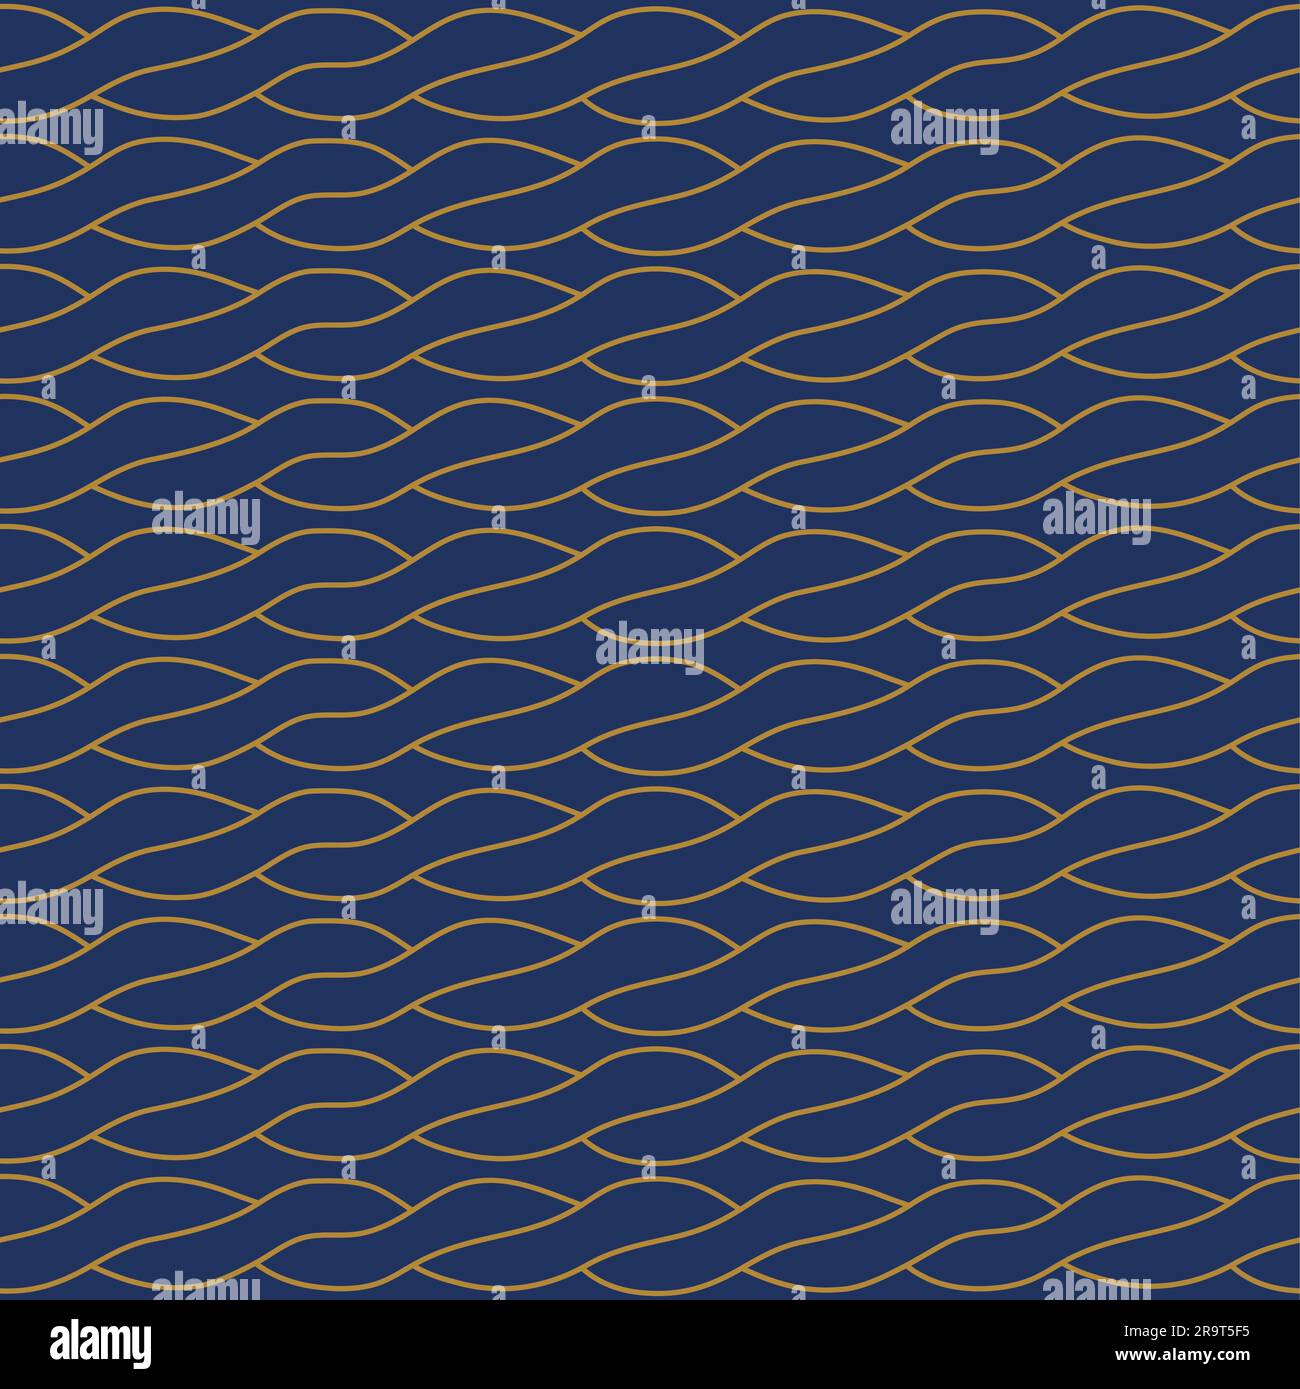 Seamless pattern Rope stacking in horizontal pattern Abstract background Endless navy illustration with beige rope ornament, horizontal cord strokes o Stock Vector